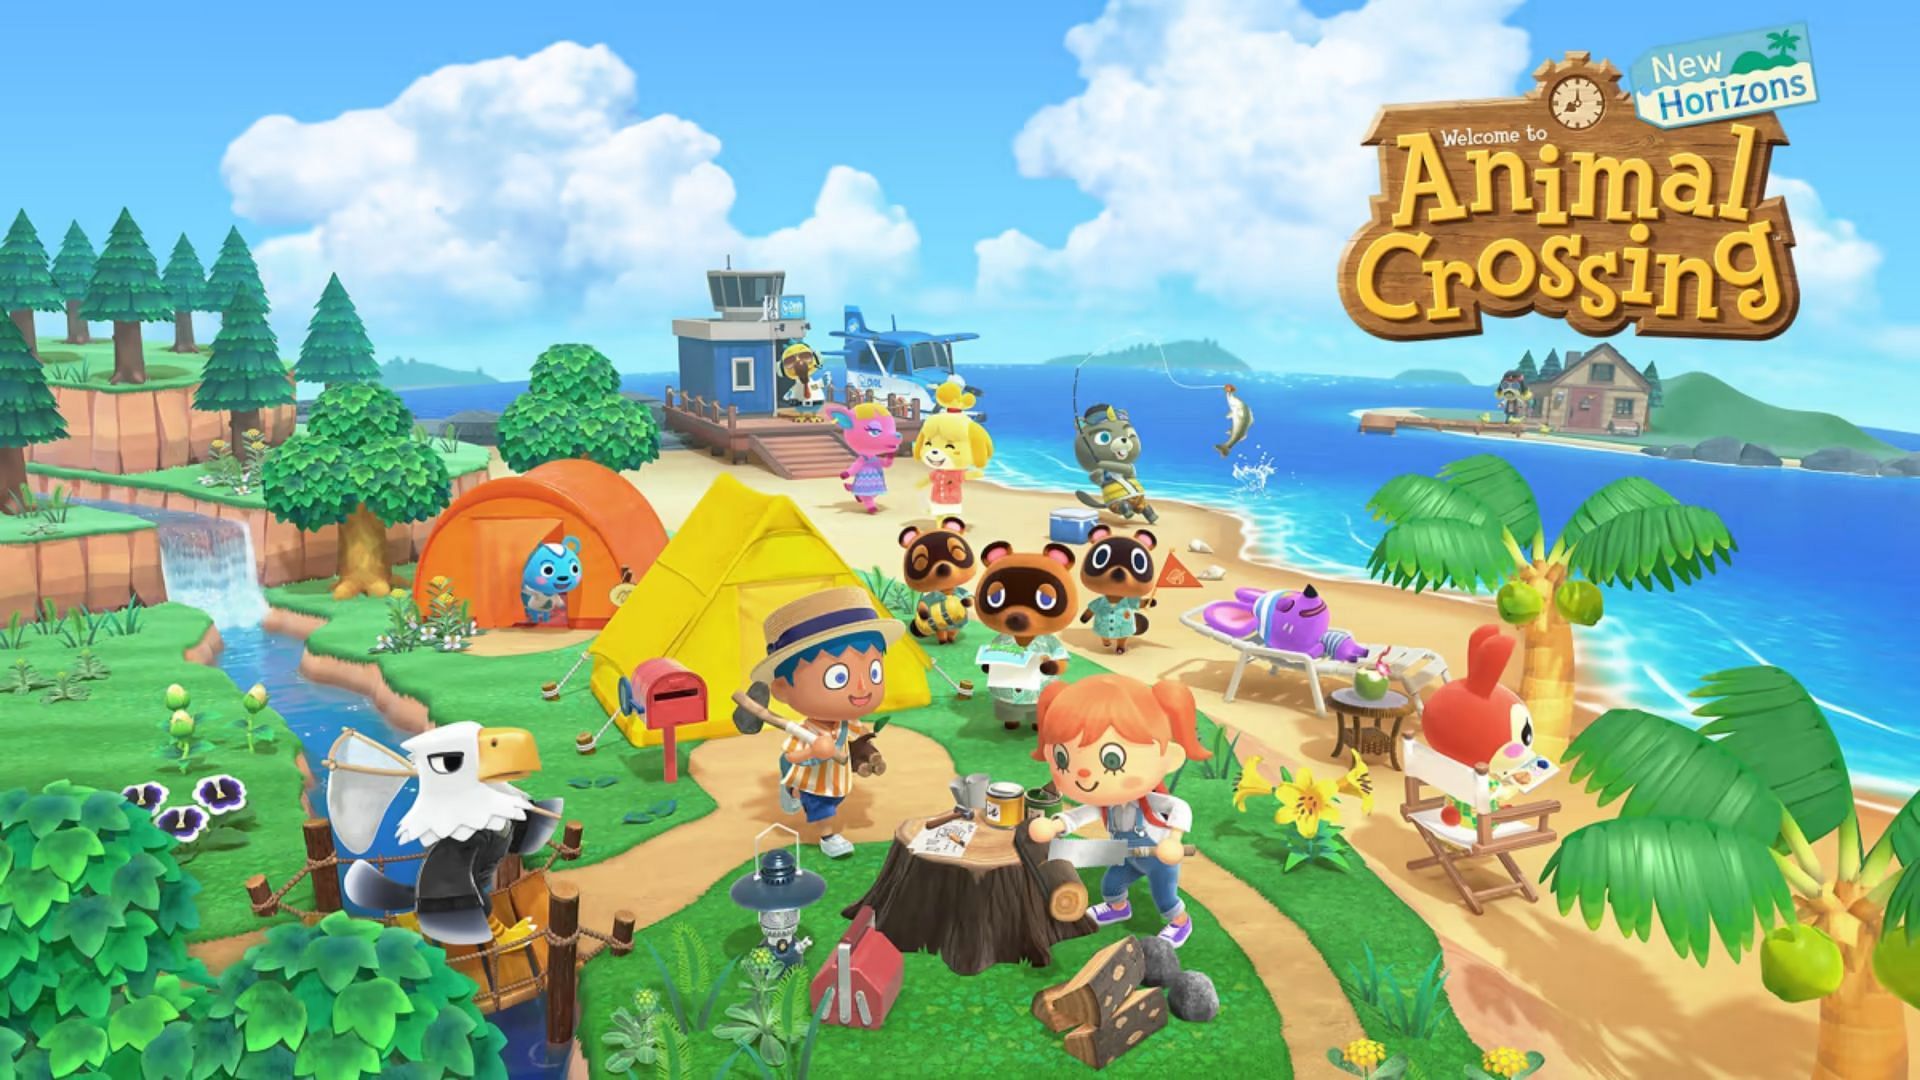 Animal Crossing: New Horizons has several features that make it a very addictive game (Image via Nintendo)